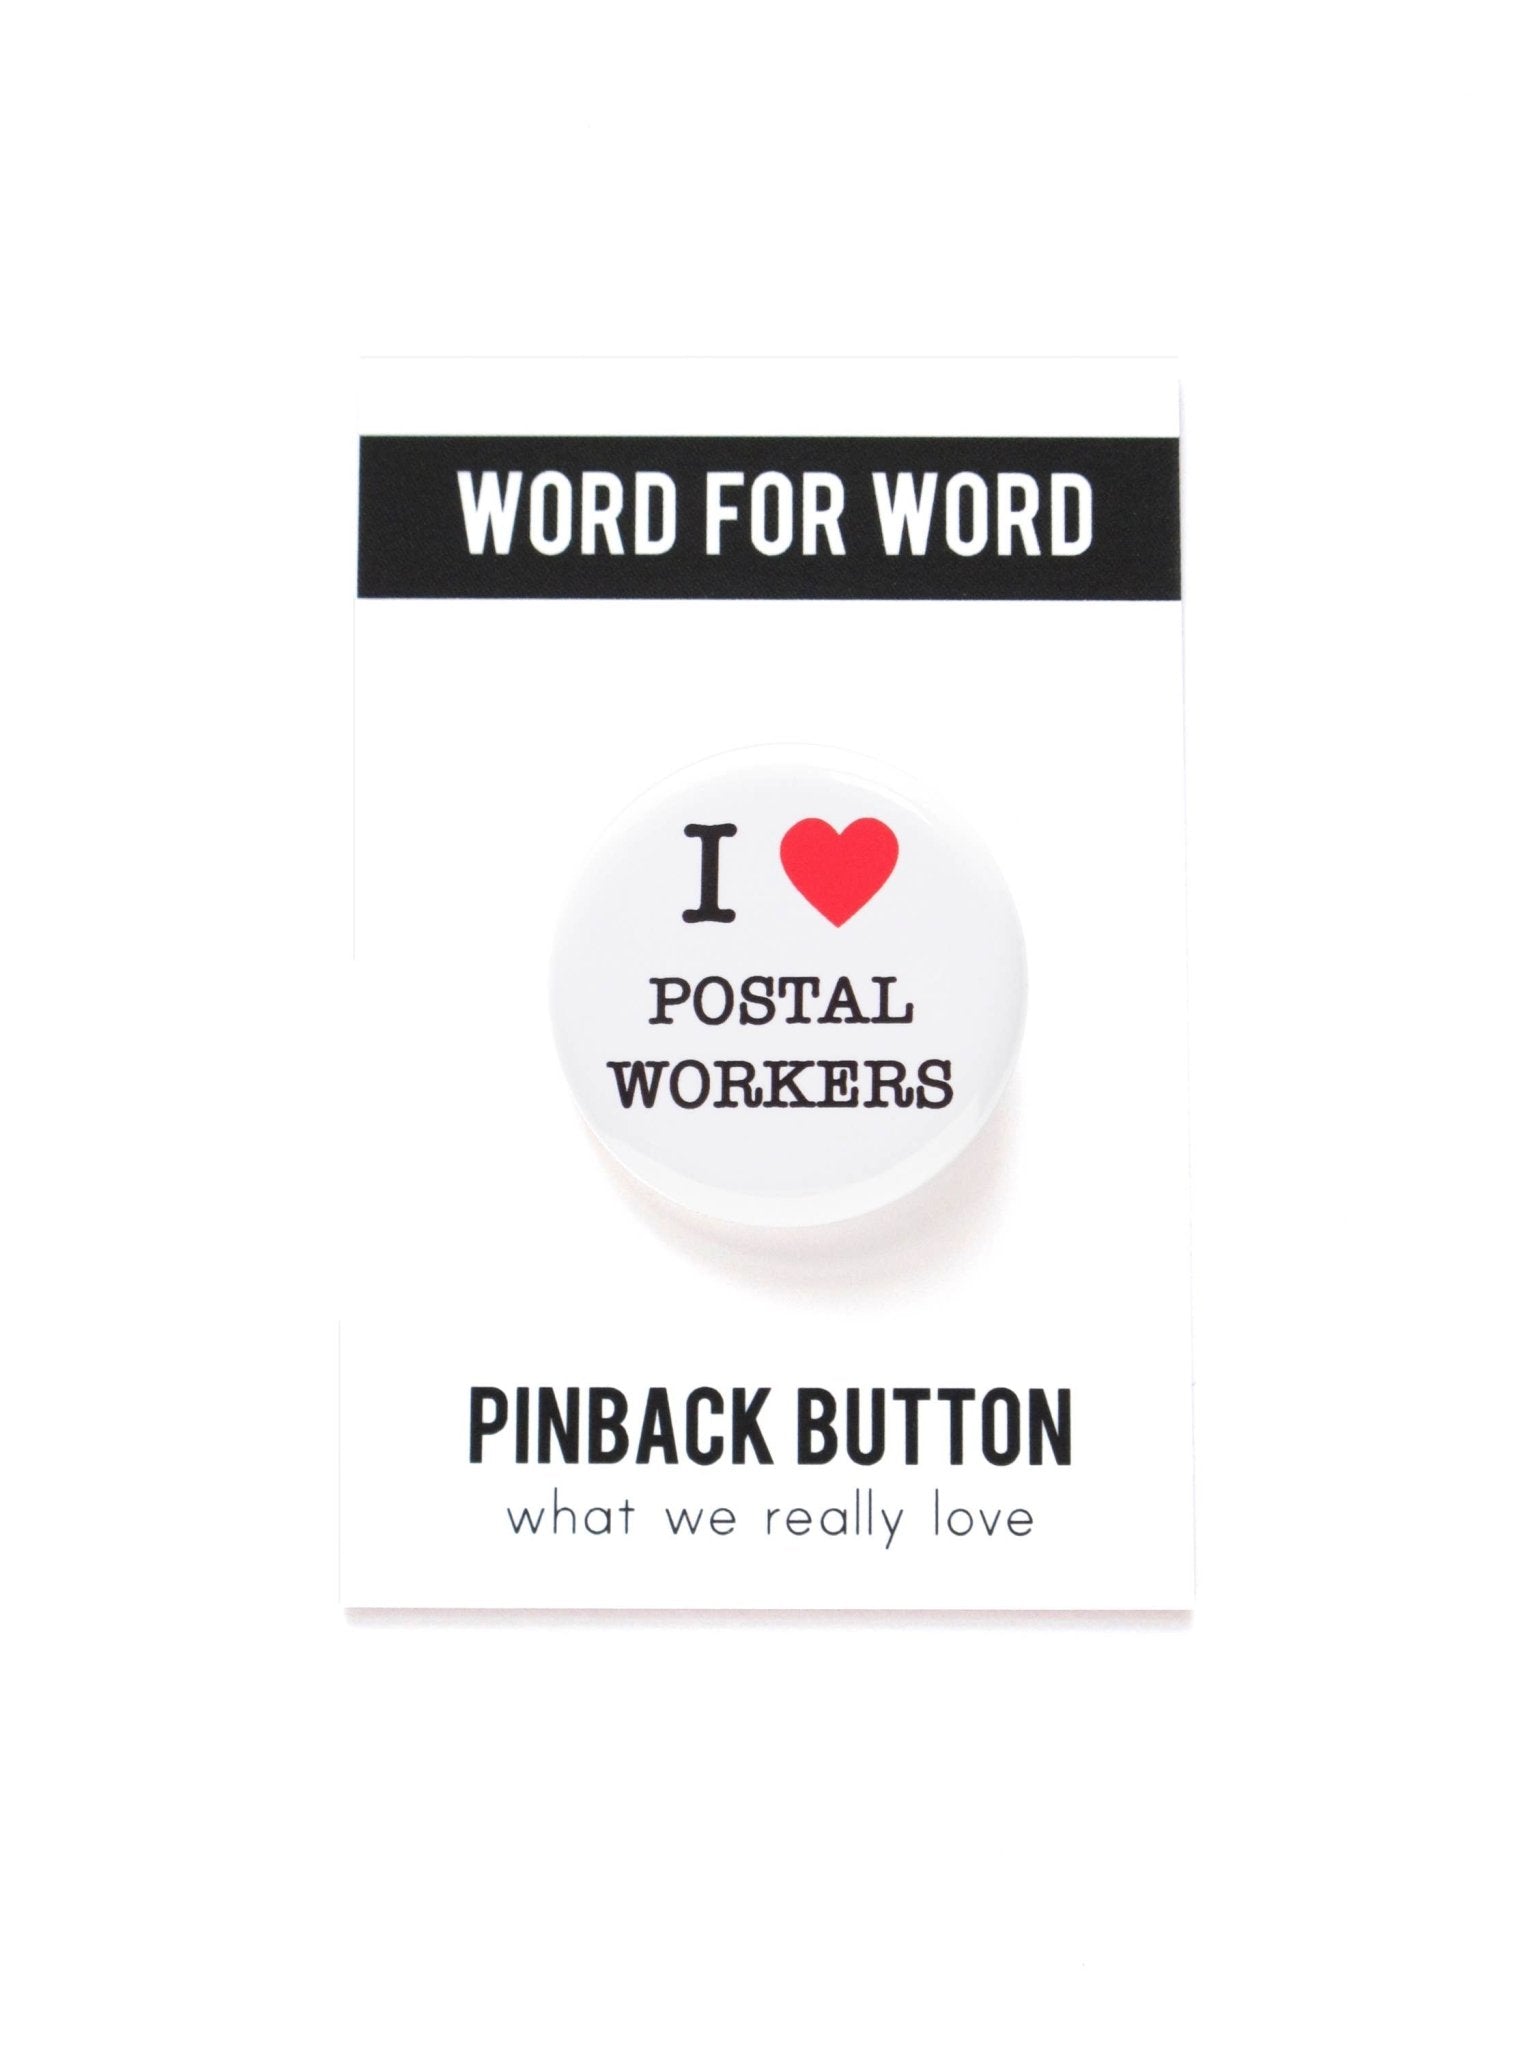 I HEART POSTAL WORKERS pinback button - Spiral Circle